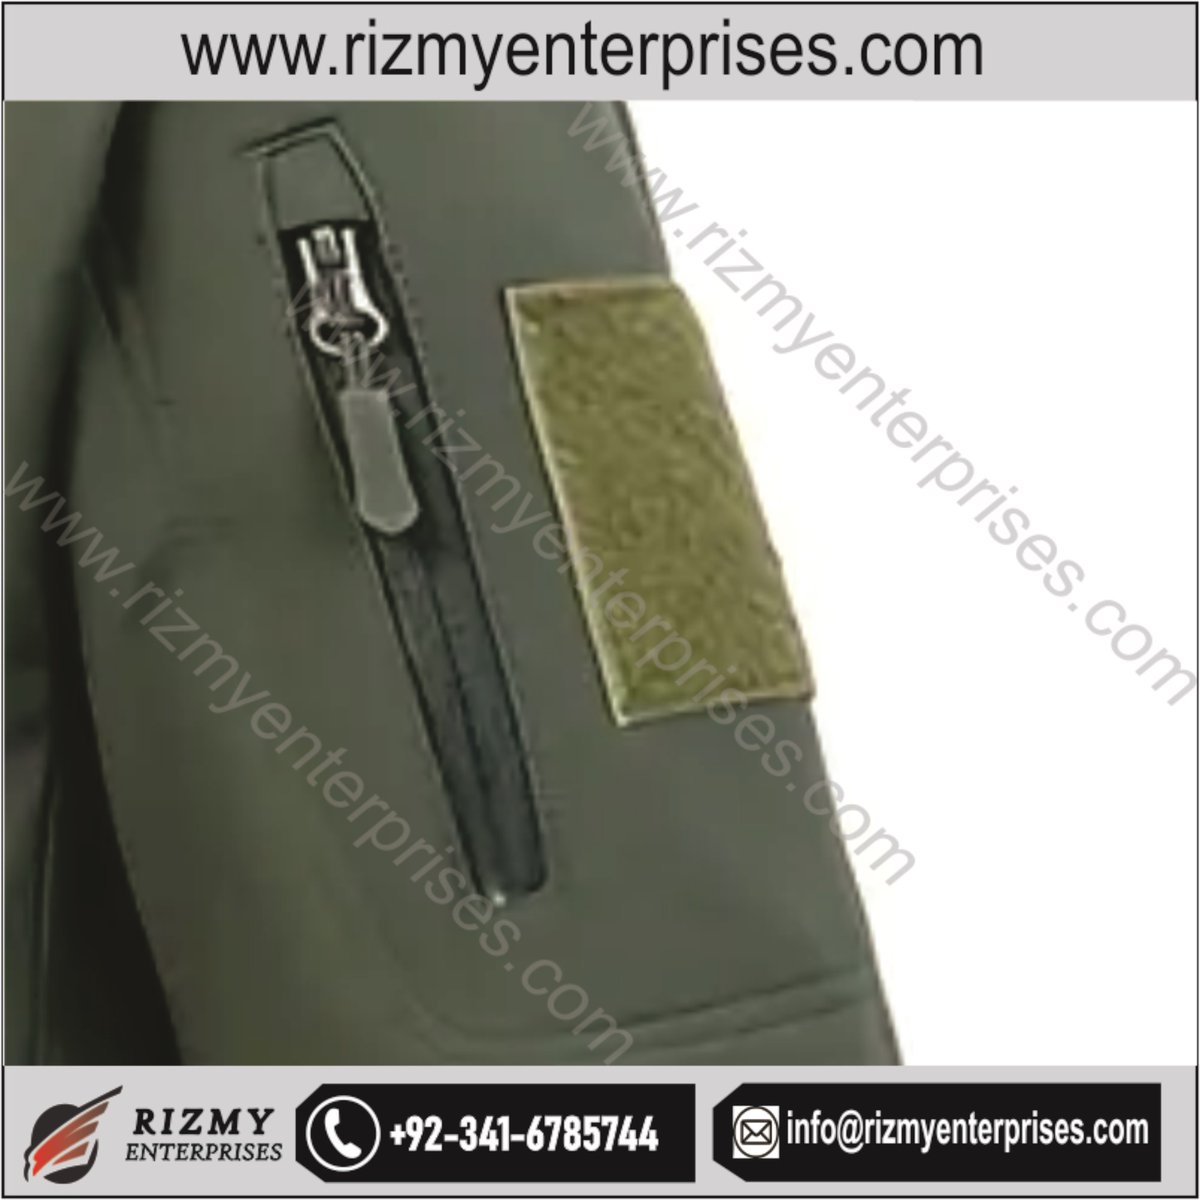 Waterproof Jacket by Rizmy 
Unmatched Protection
Functional Design
Customizable Fit
#winterfashion #WaterProofJacket #rizmyjacket #rizmy #jackets #outdoorjacket #customizedapparel #sportswearmanufacturer #sportswearmanufacturerpakistan